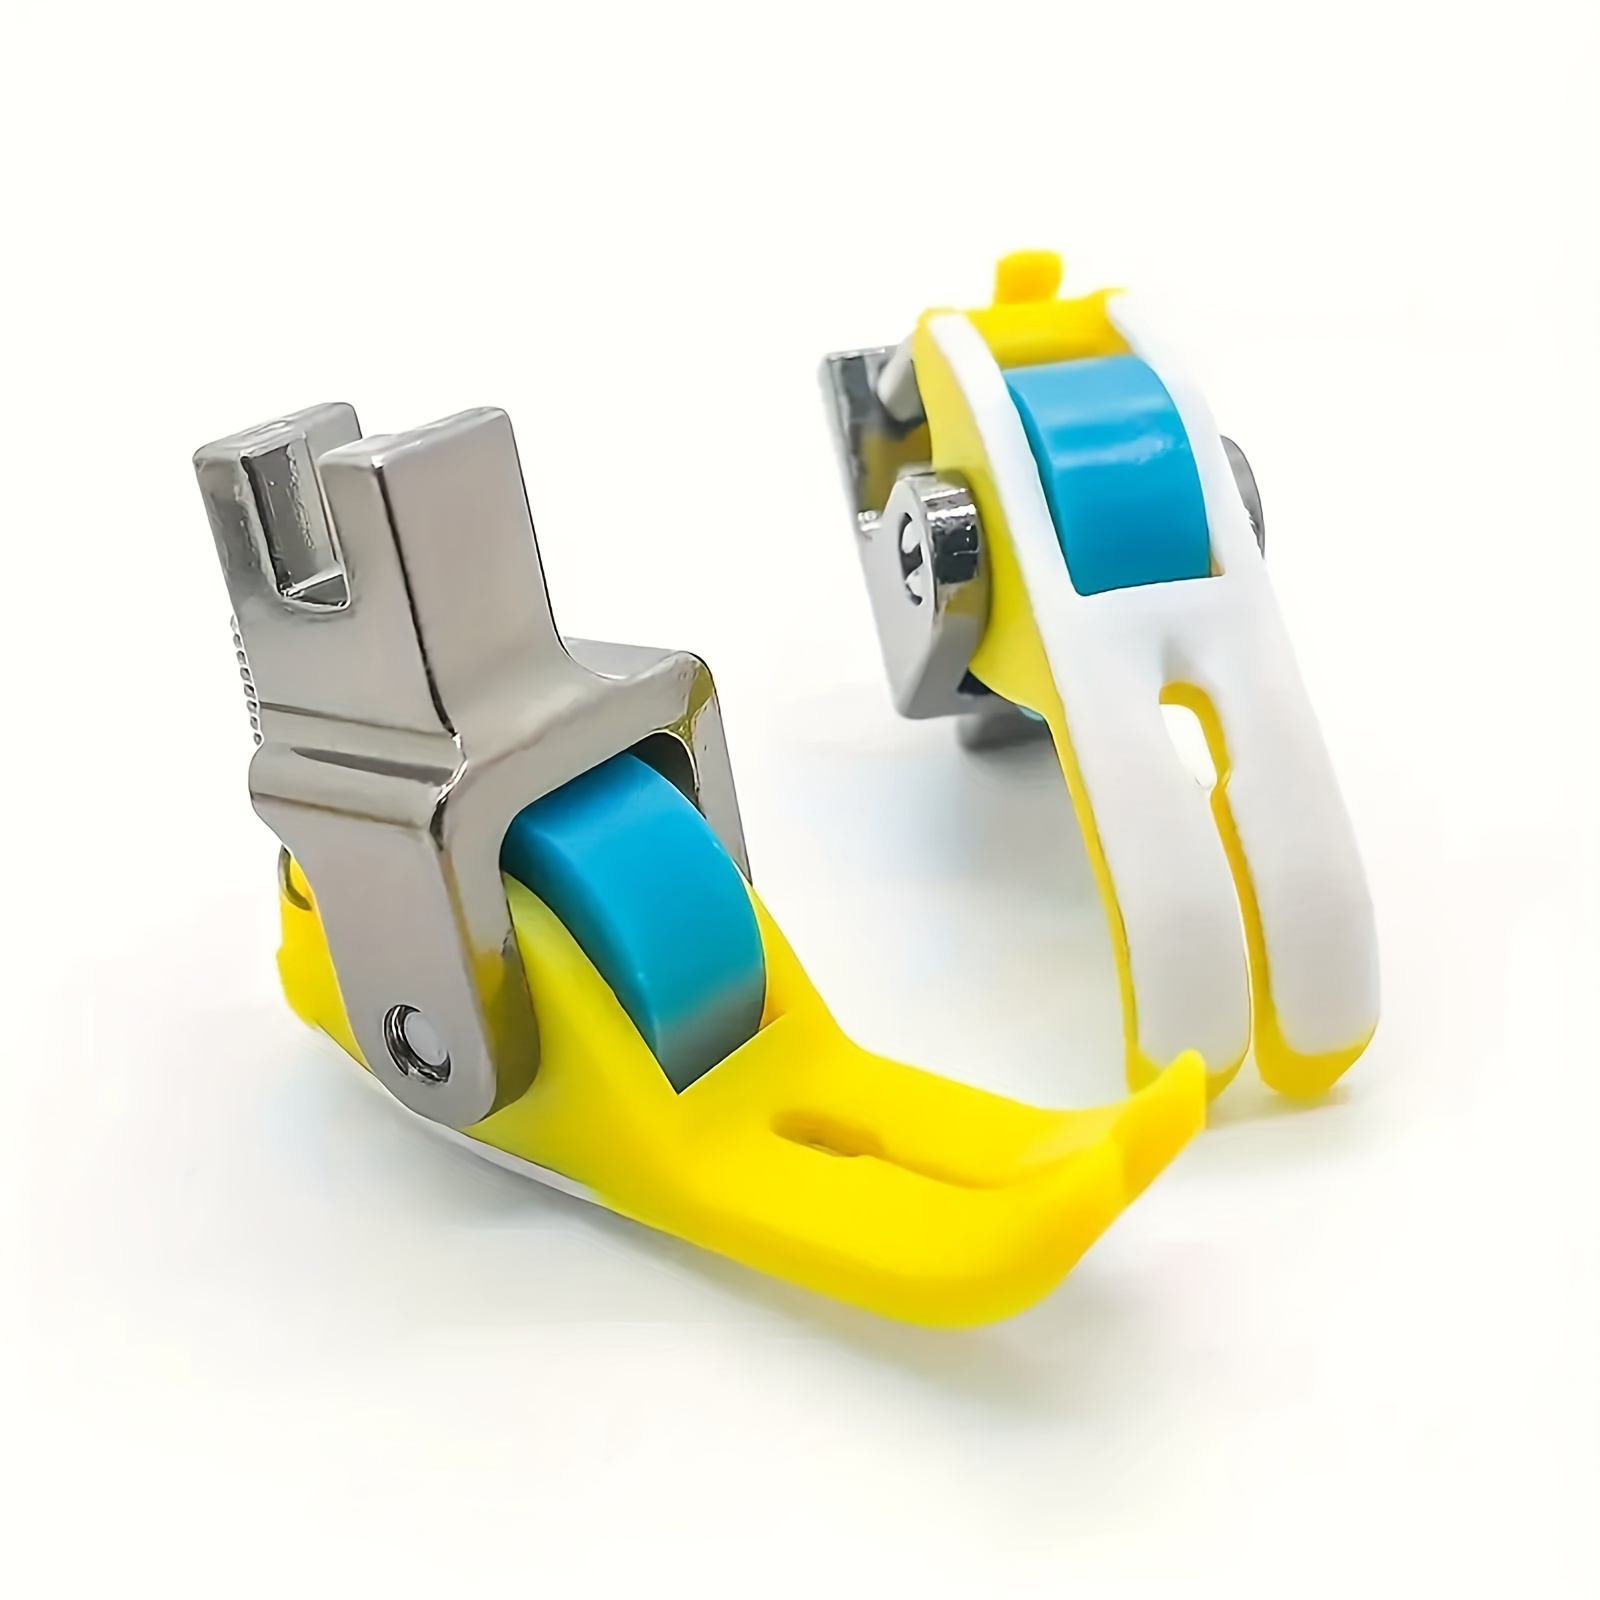 

1pc Bright Yellow Roller Presser Foot For Smooth Sewing - Ideal For Thick & Thin Fabrics, No-snag Design